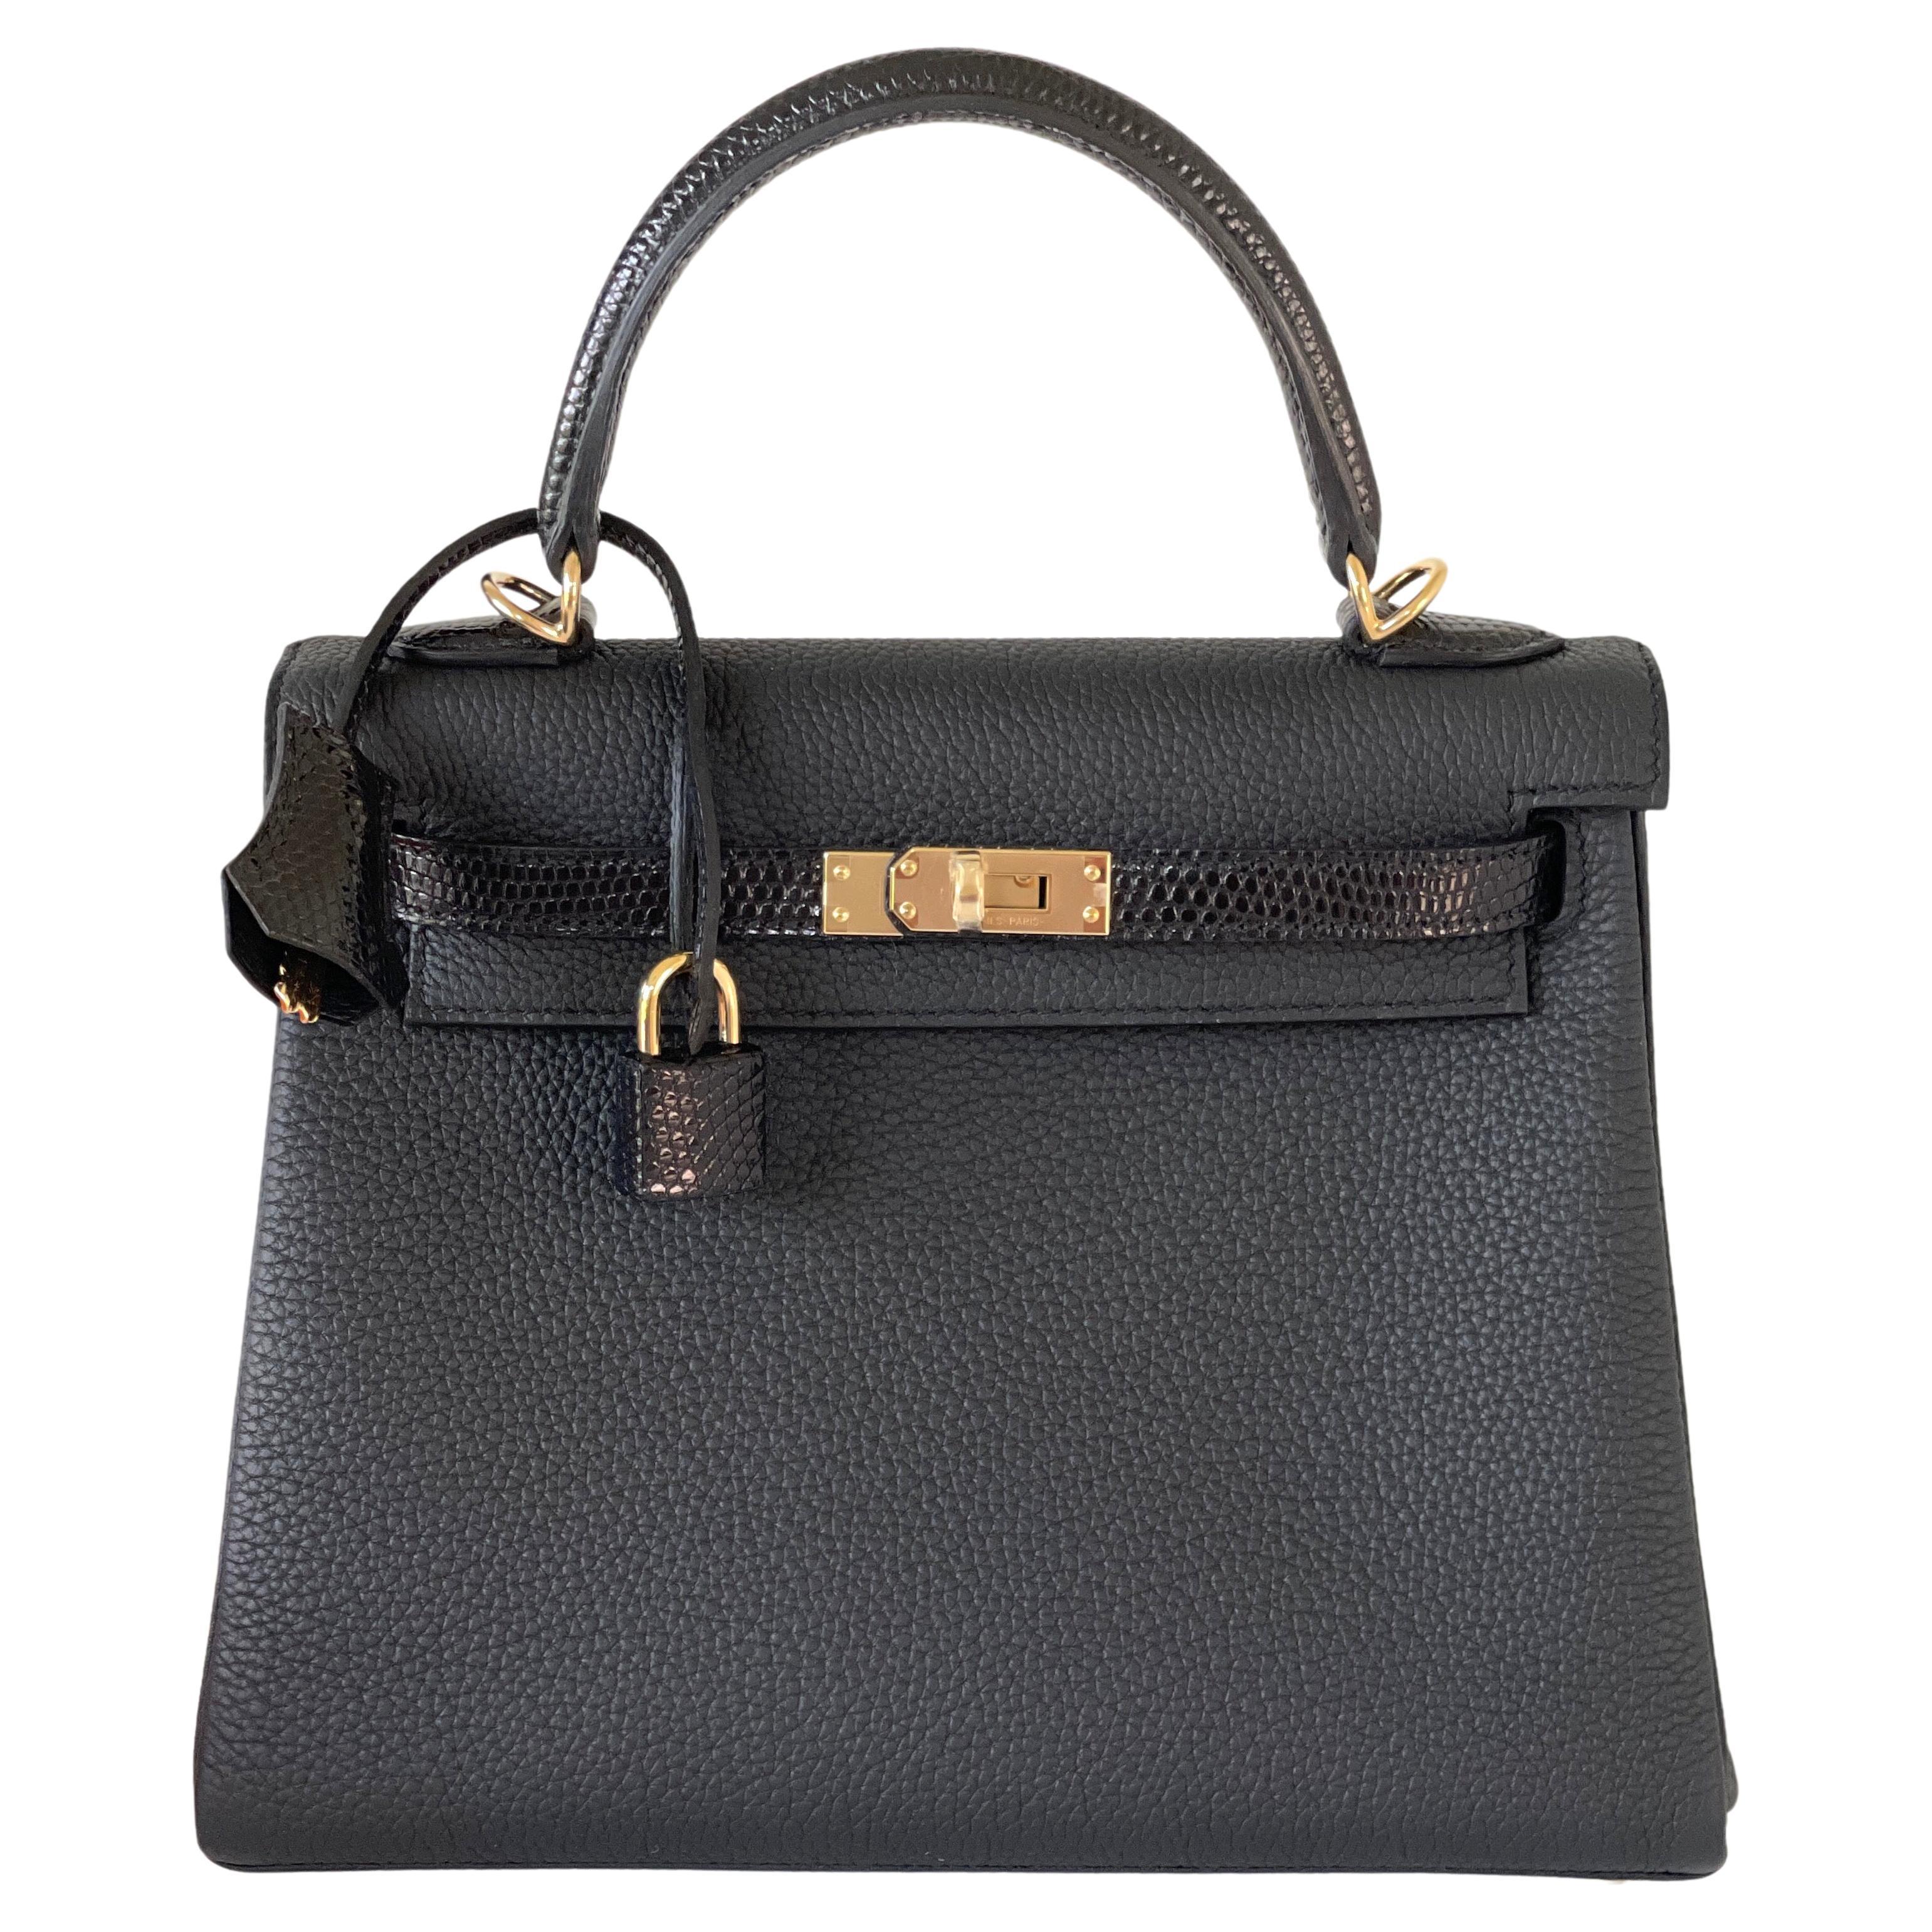 Hermes Kelly Touch 25 Black Lizard Togo Permabrass